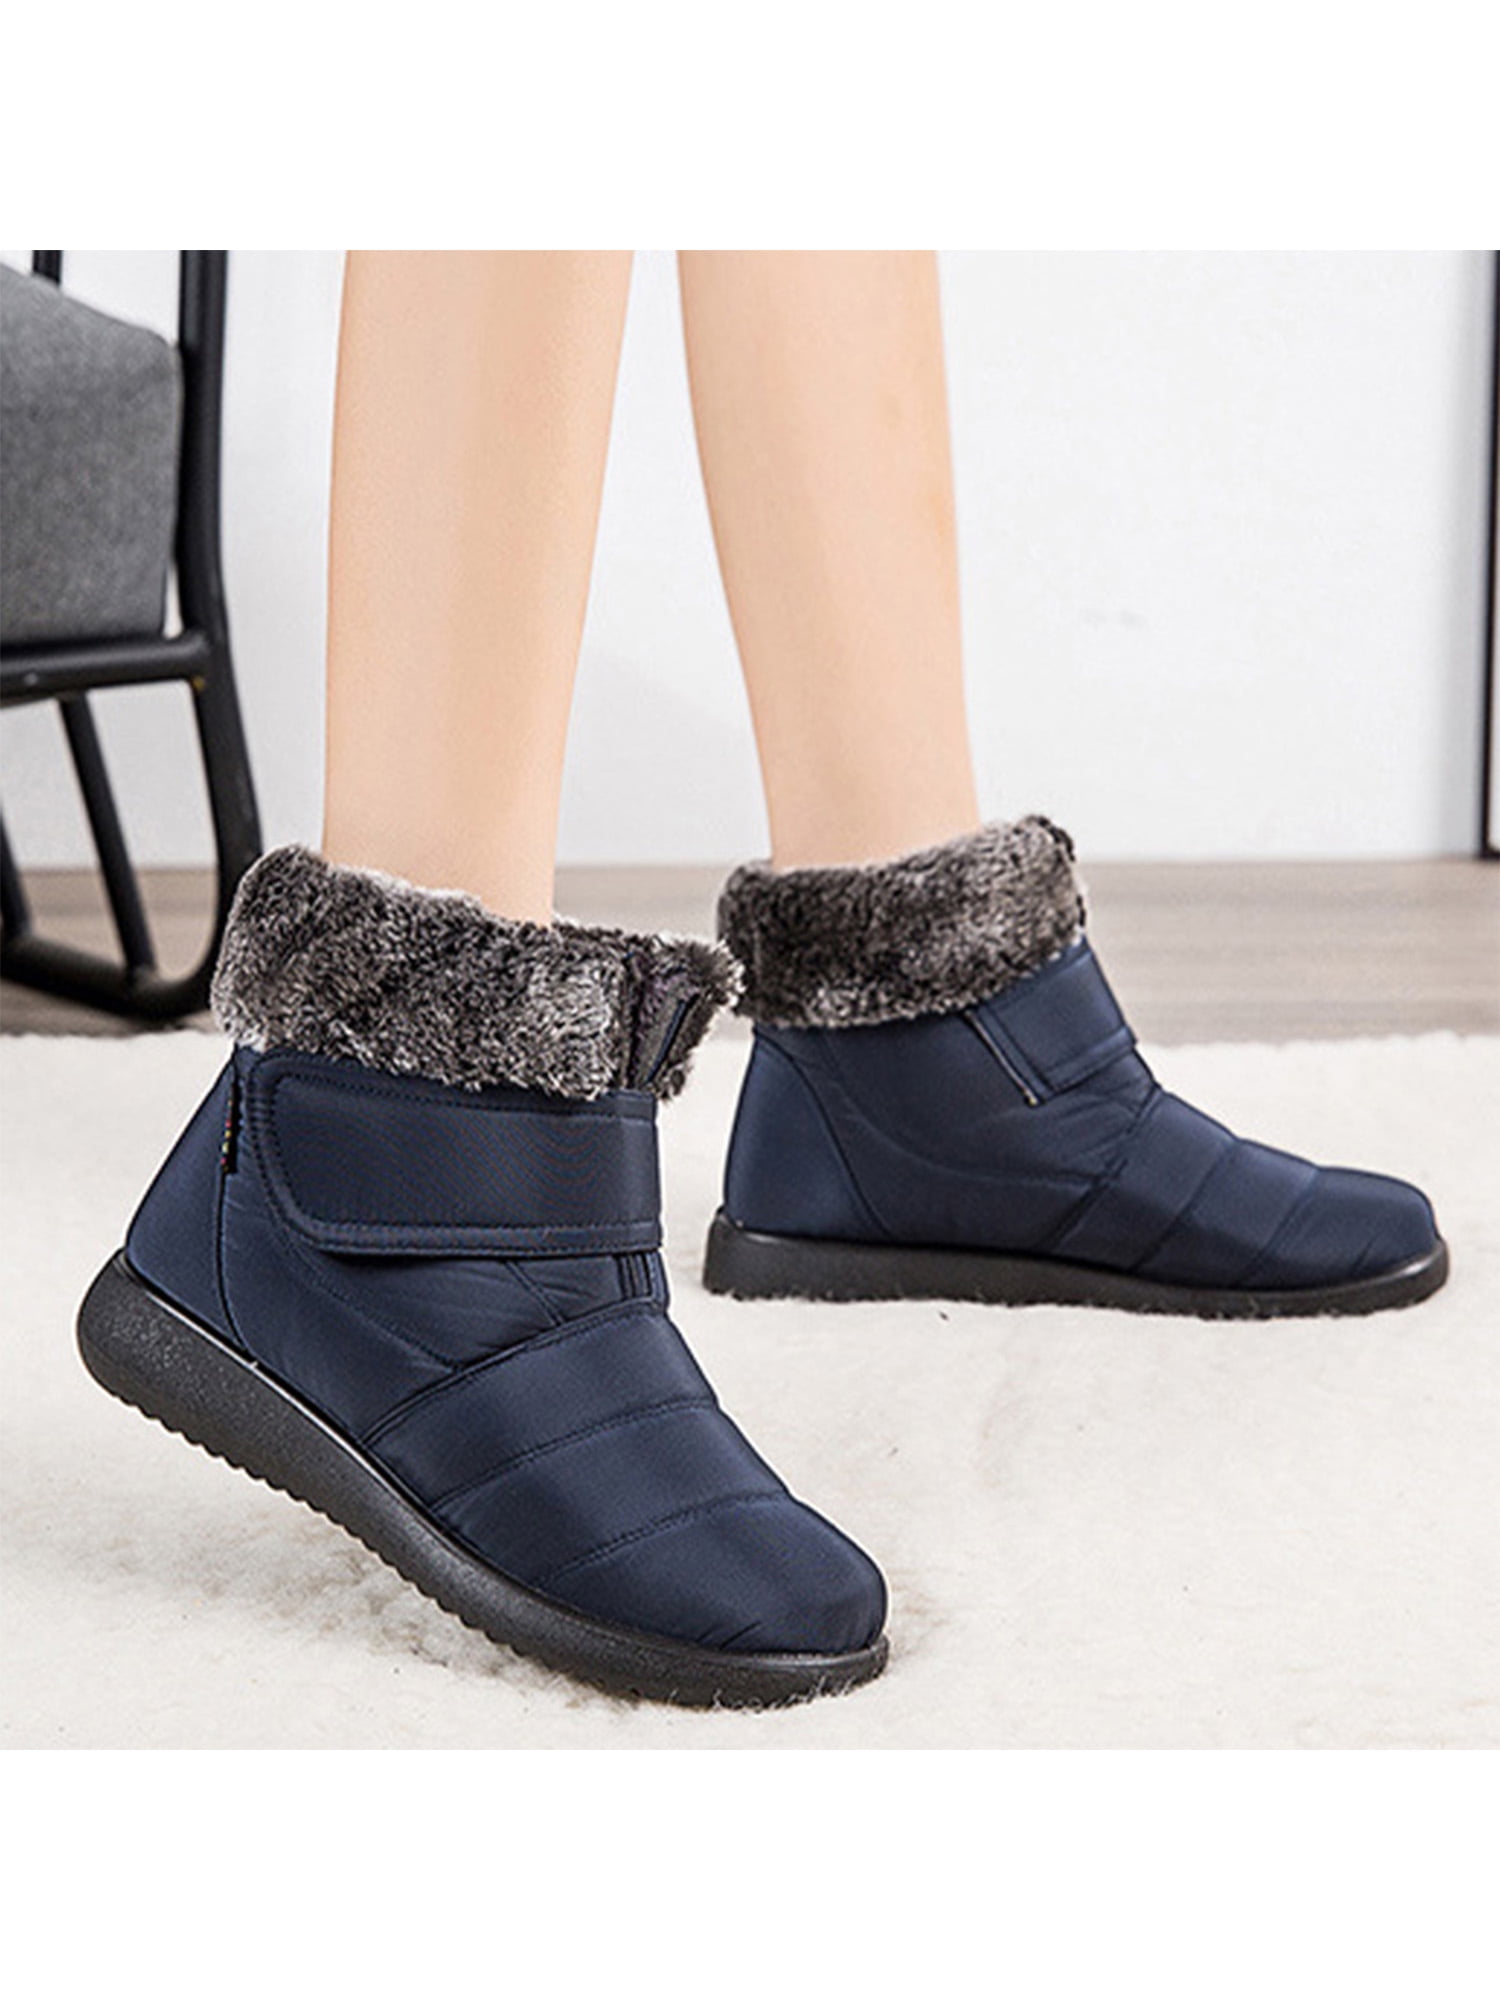 Details about   Womens Suede Snow Ankle Boots Fur Lining Shoes Casual Winter Warm Round Toe Chic